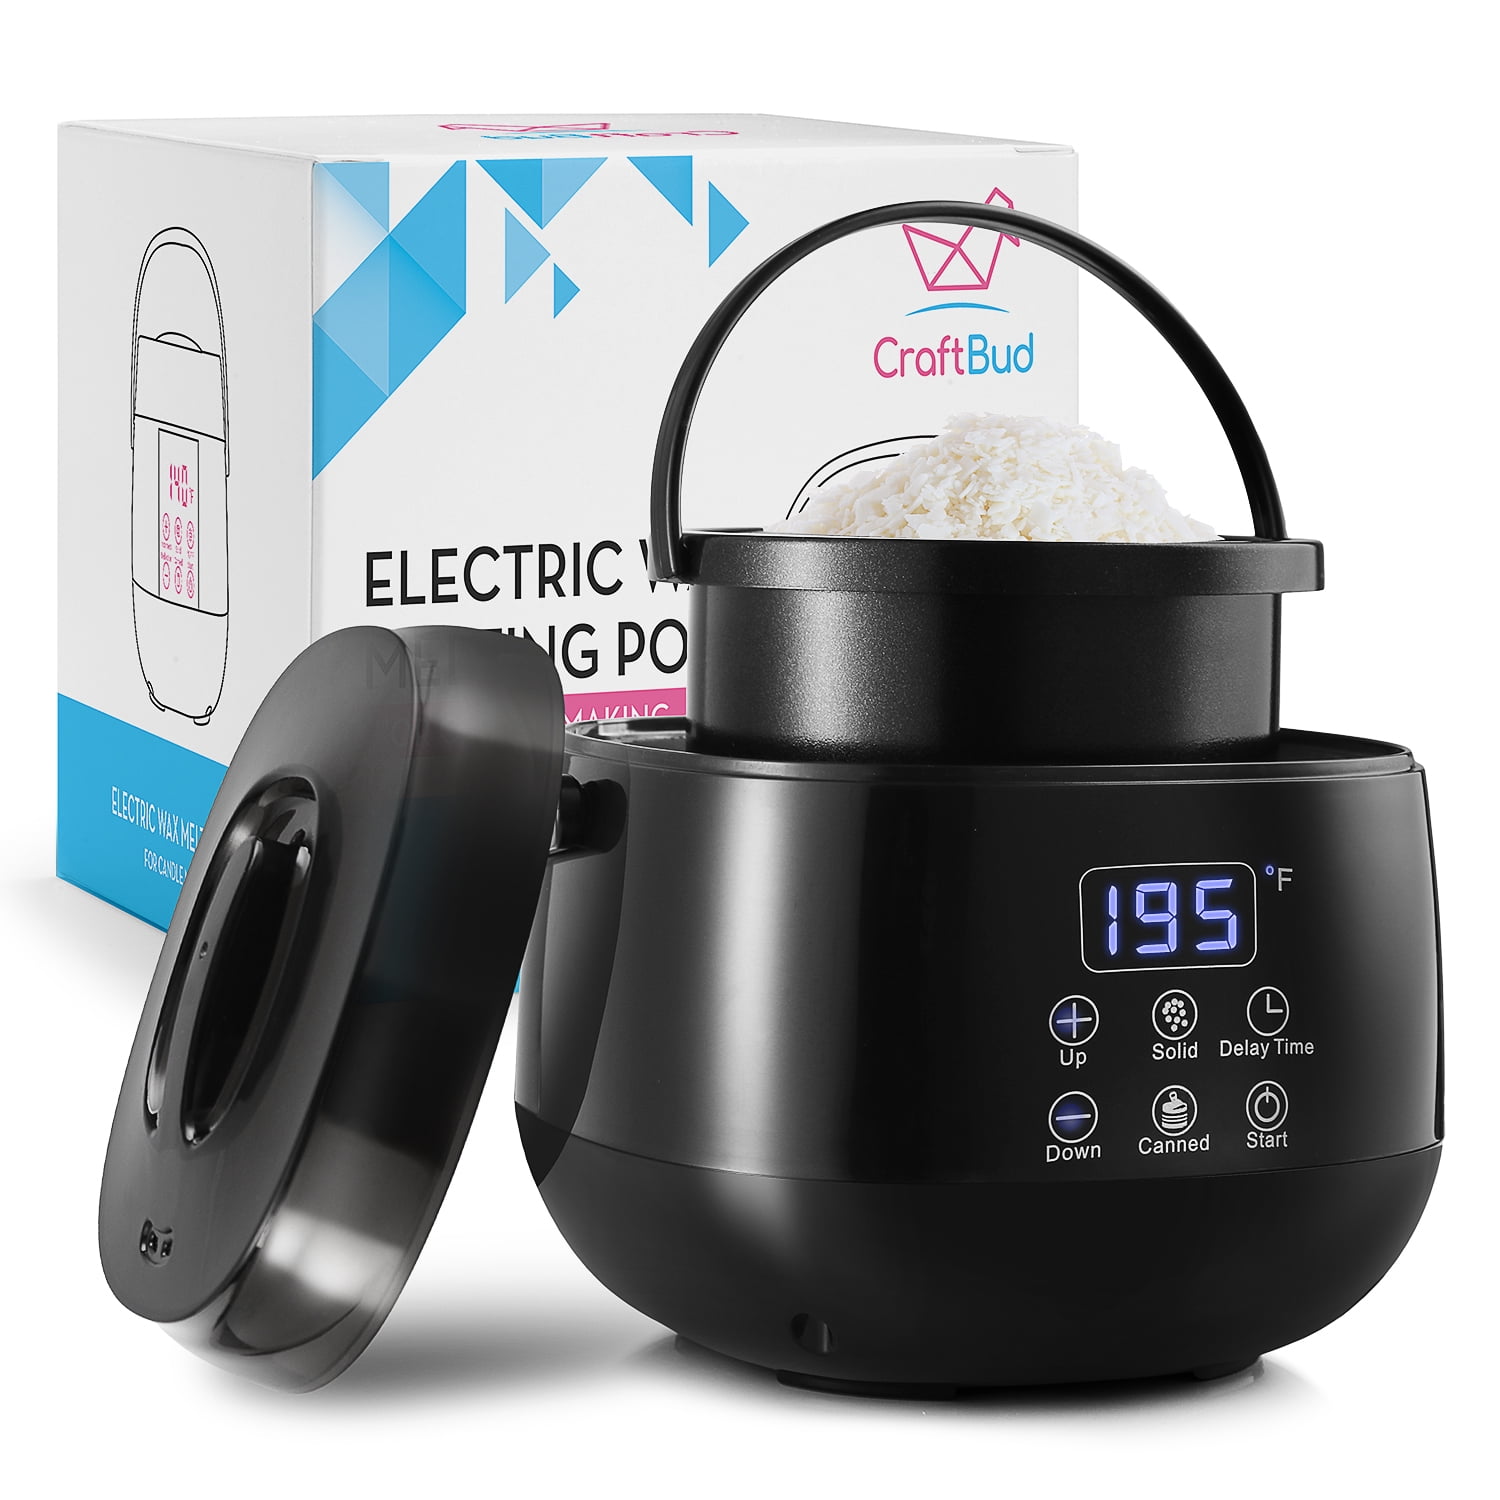 Craftbud Electric Wax Melting Pot, Wax Melt Warmer, Suitable for All Wax Types - Fast, Easy, & Clean, Size: Electric Melting Pot, Black